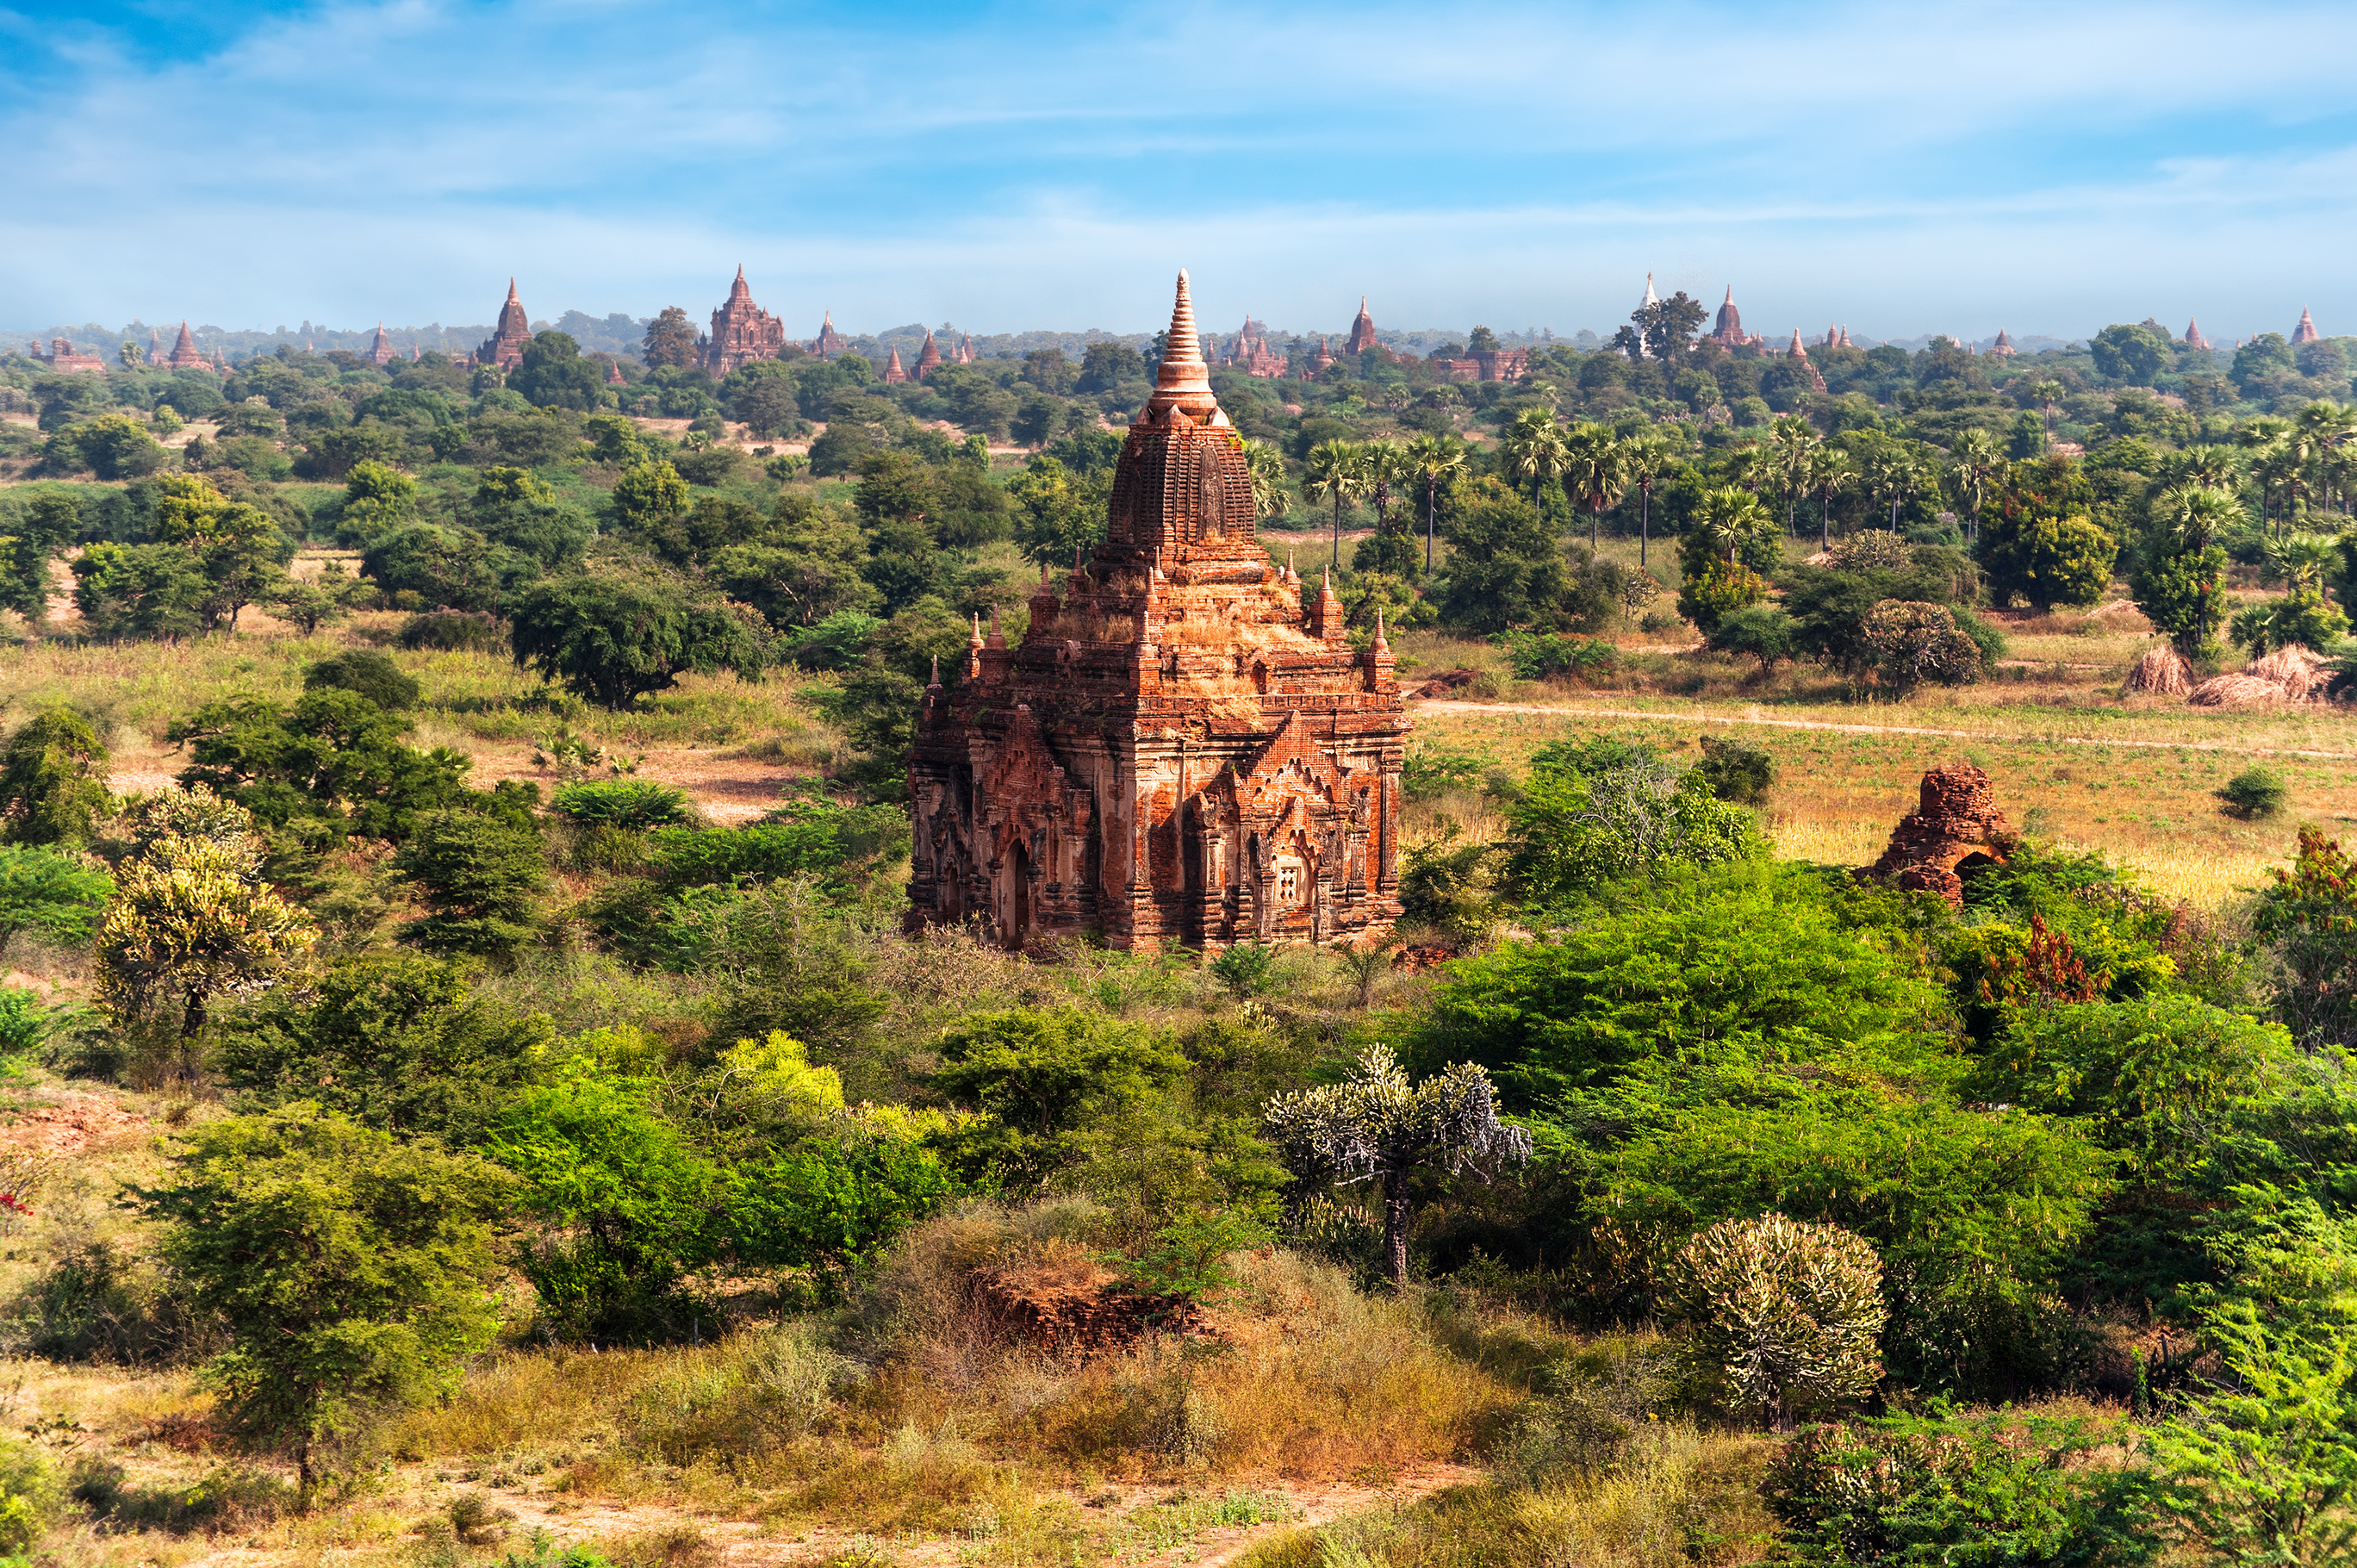 Staying in old Bagan offers a more picturesque experience